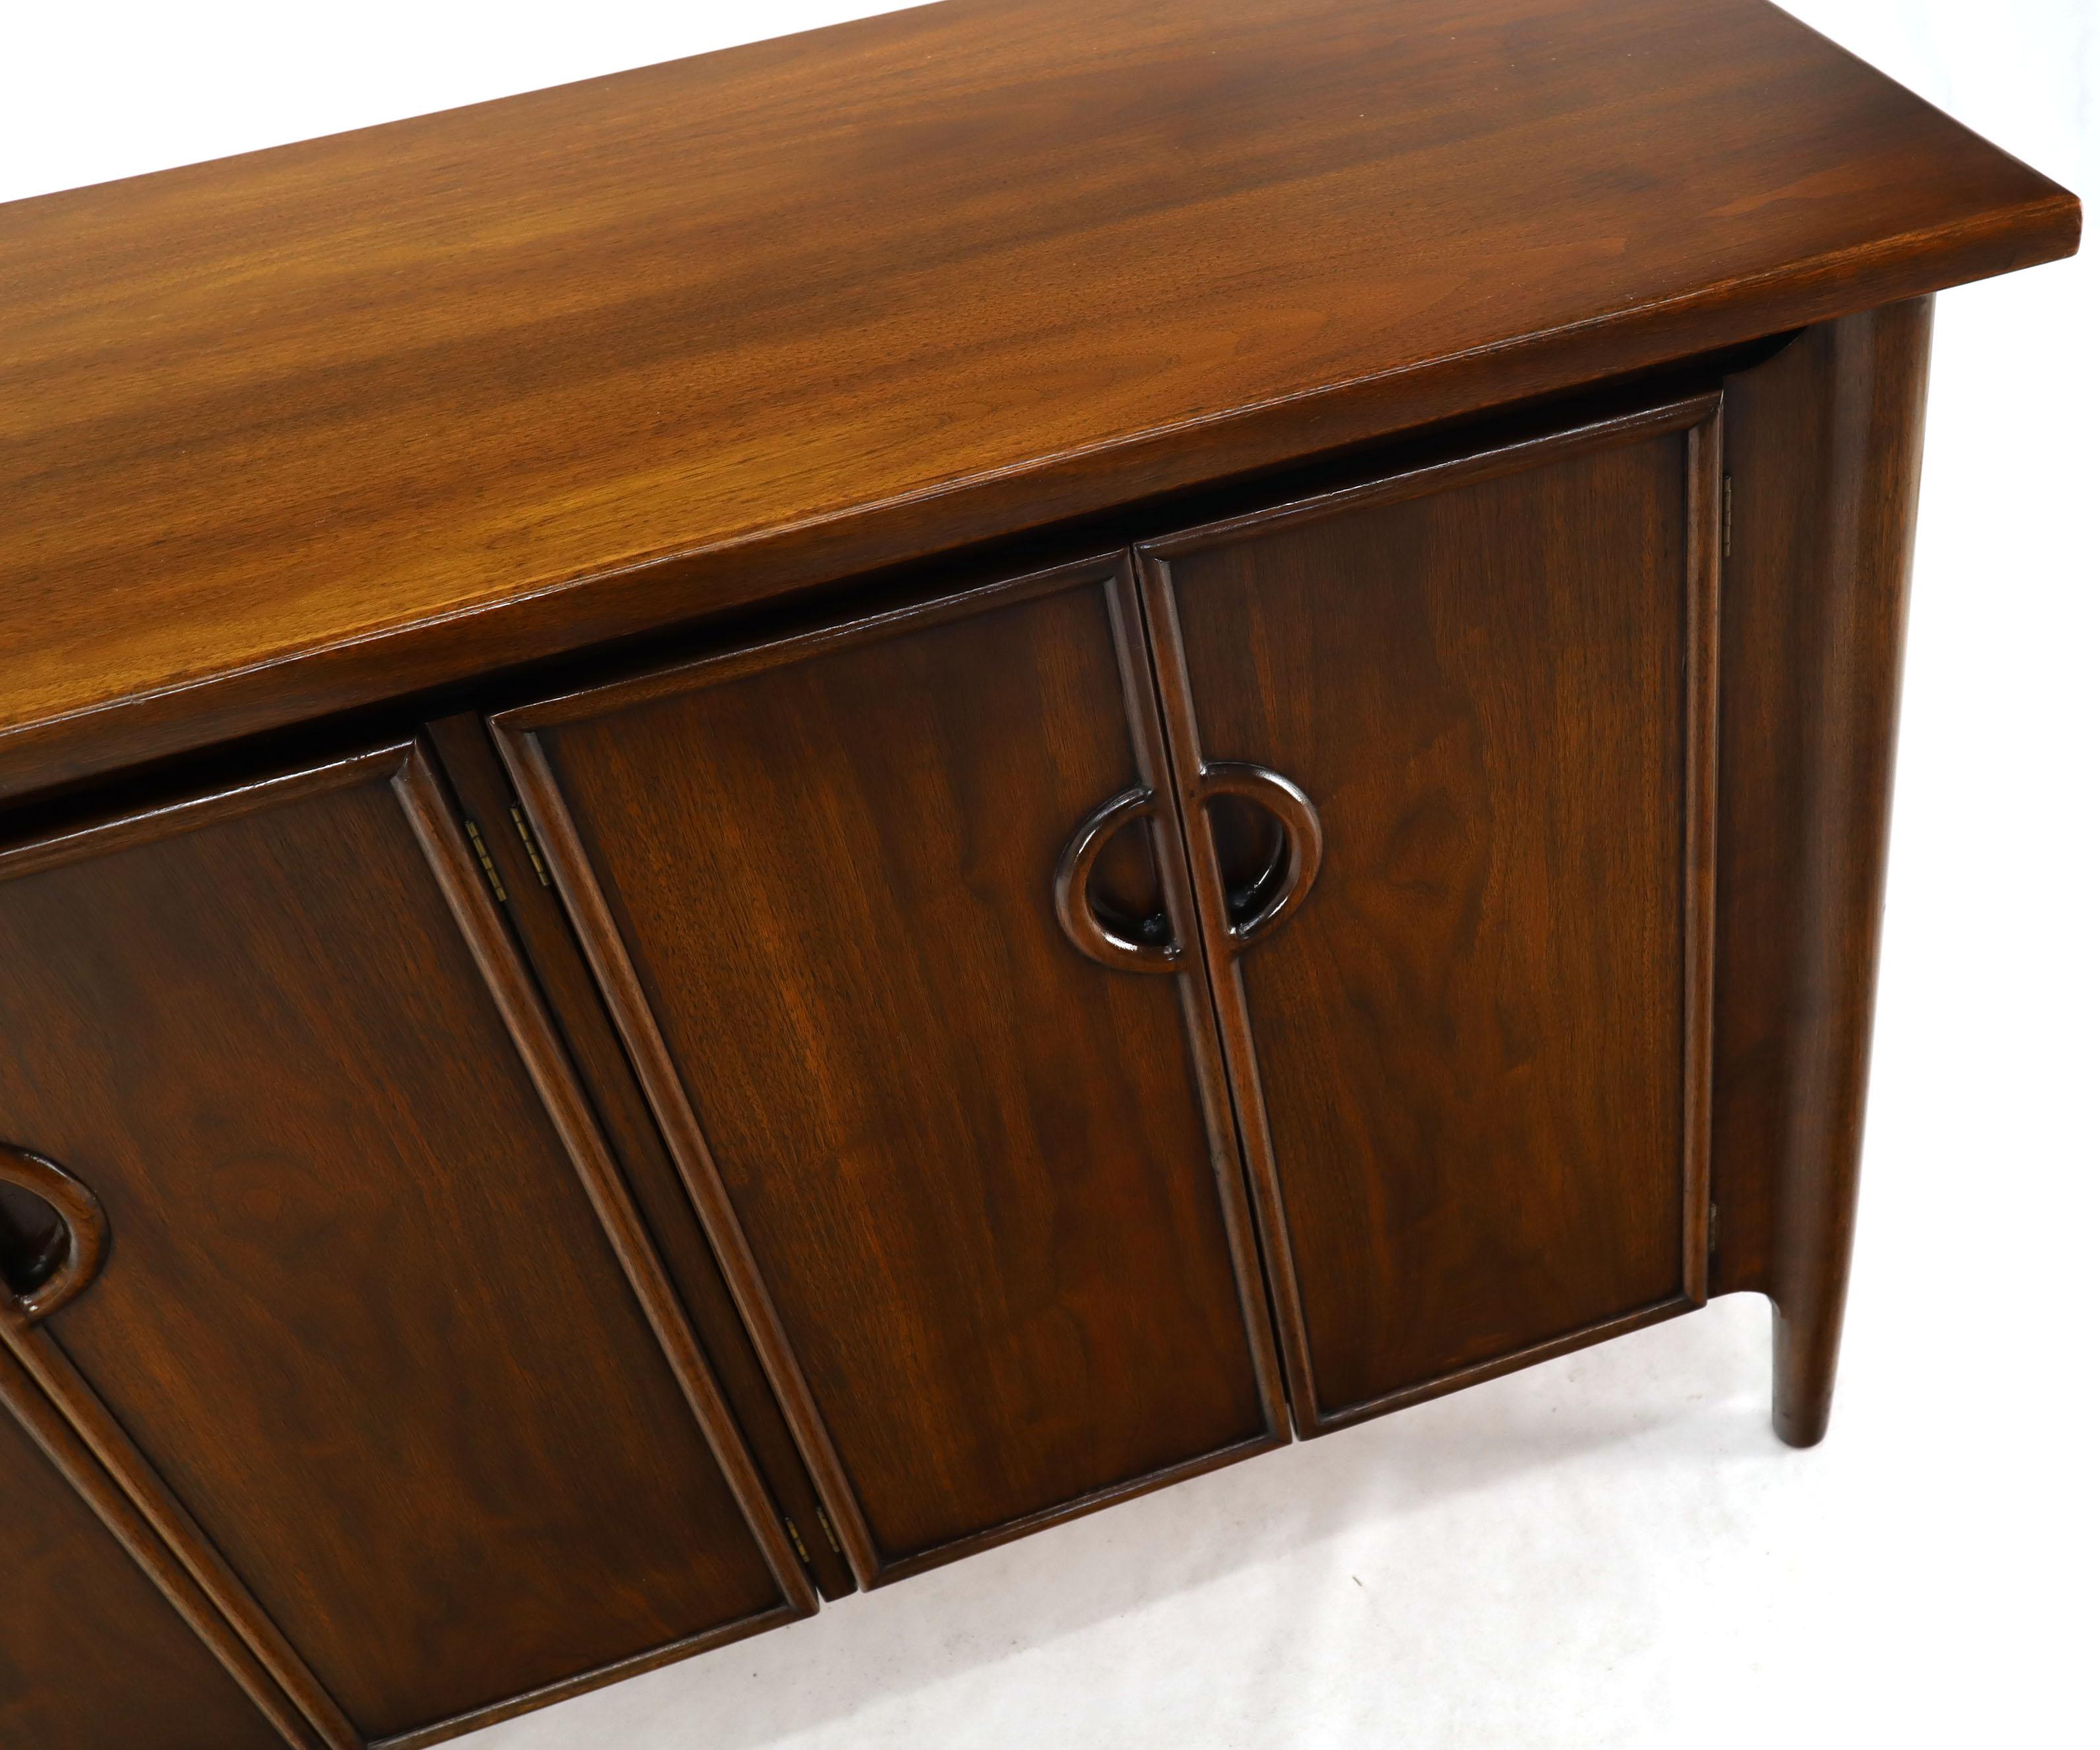 Lacquered Exposed Sculptural Legs Nine Drawers Long Dresser Credenza For Sale